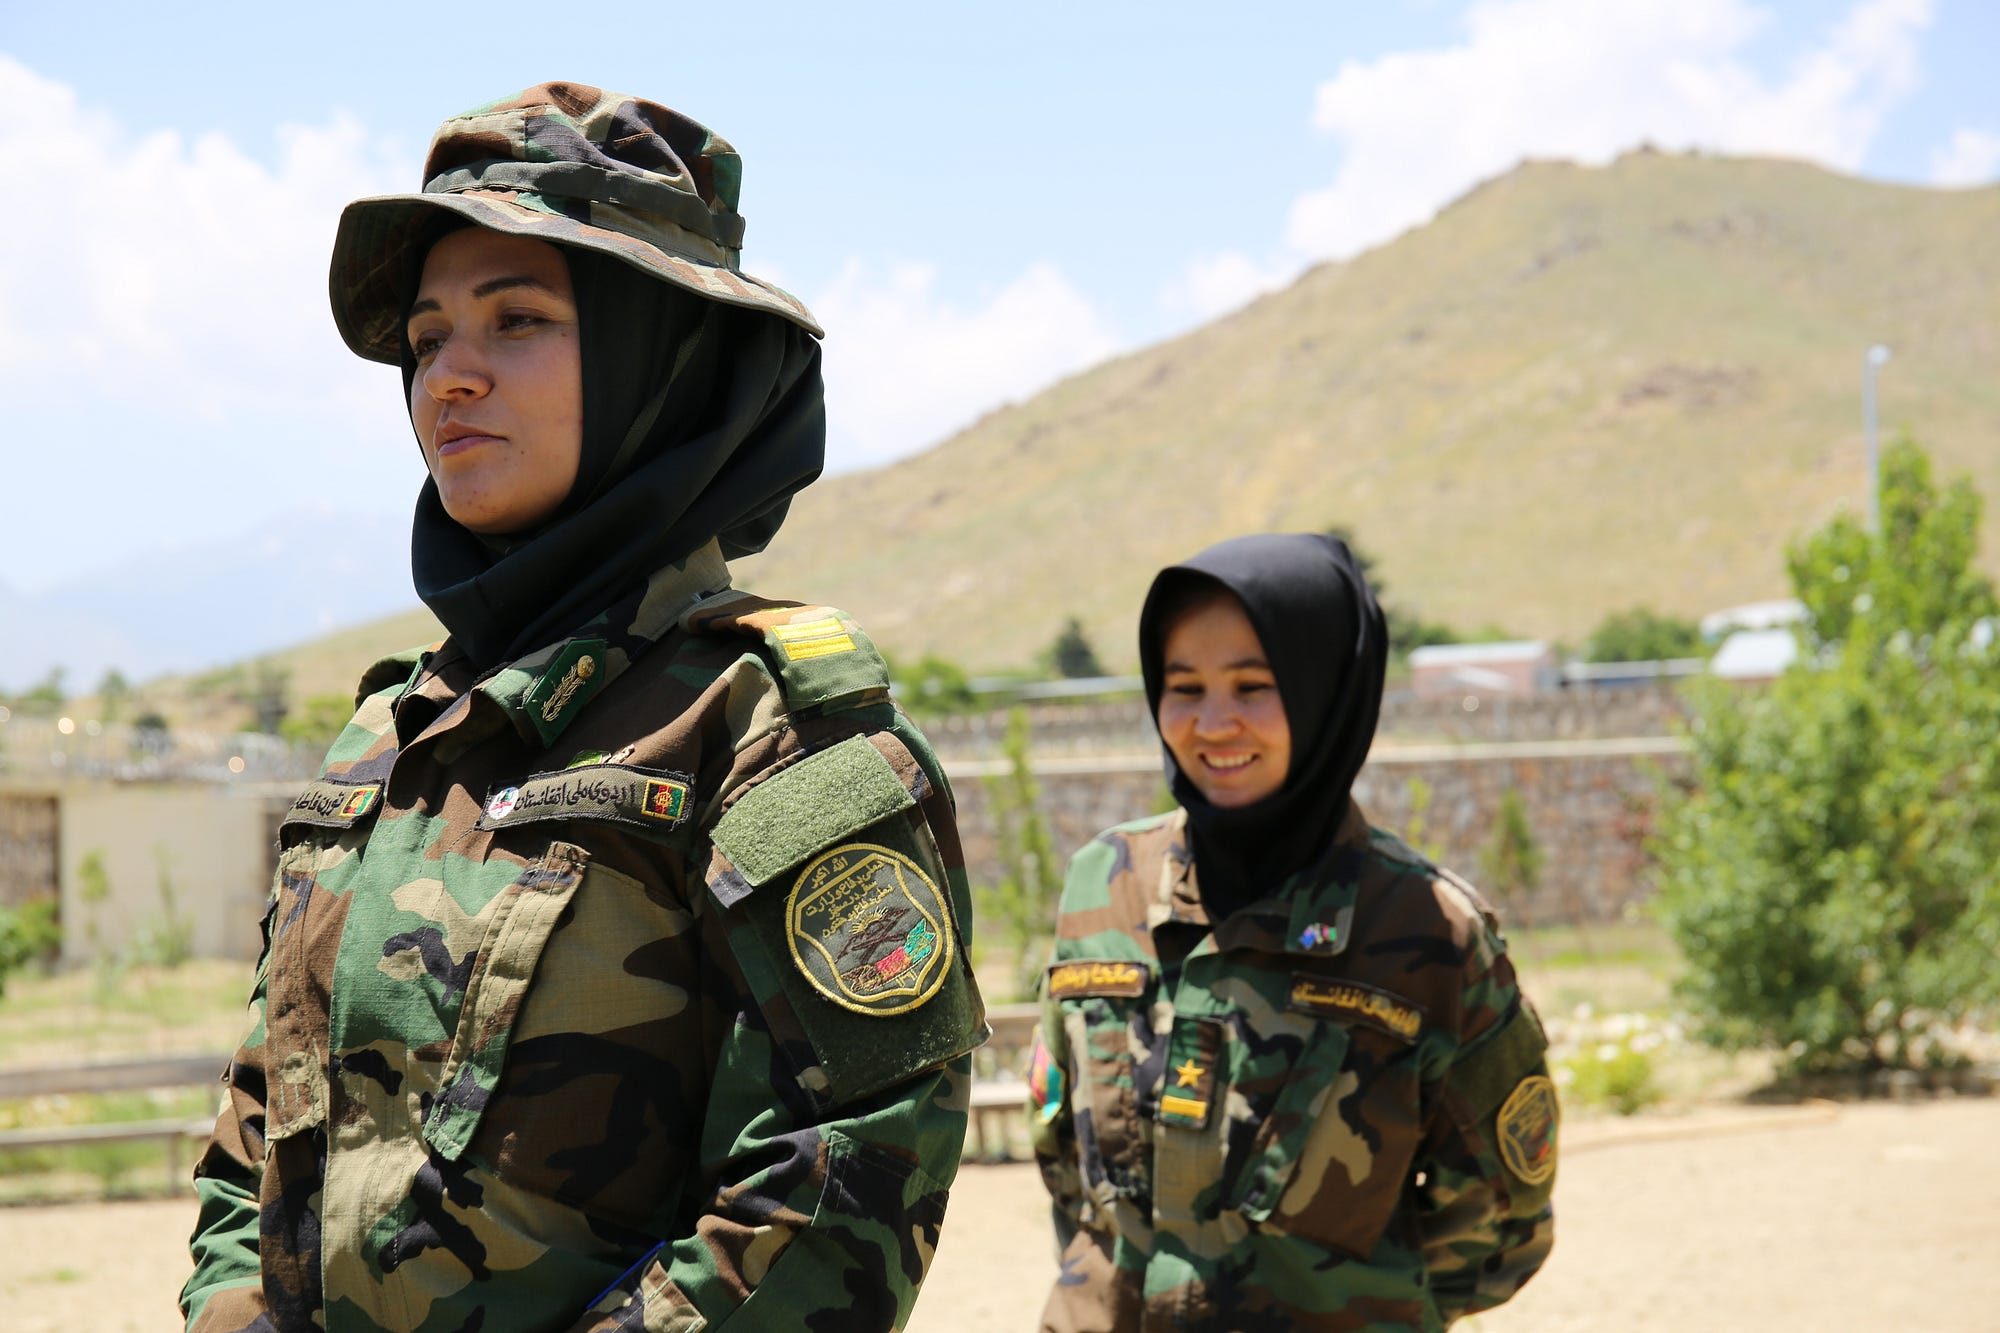 Female Afghan Soldiers Face a Battle on All Fronts by Lynzy Billing ZORA